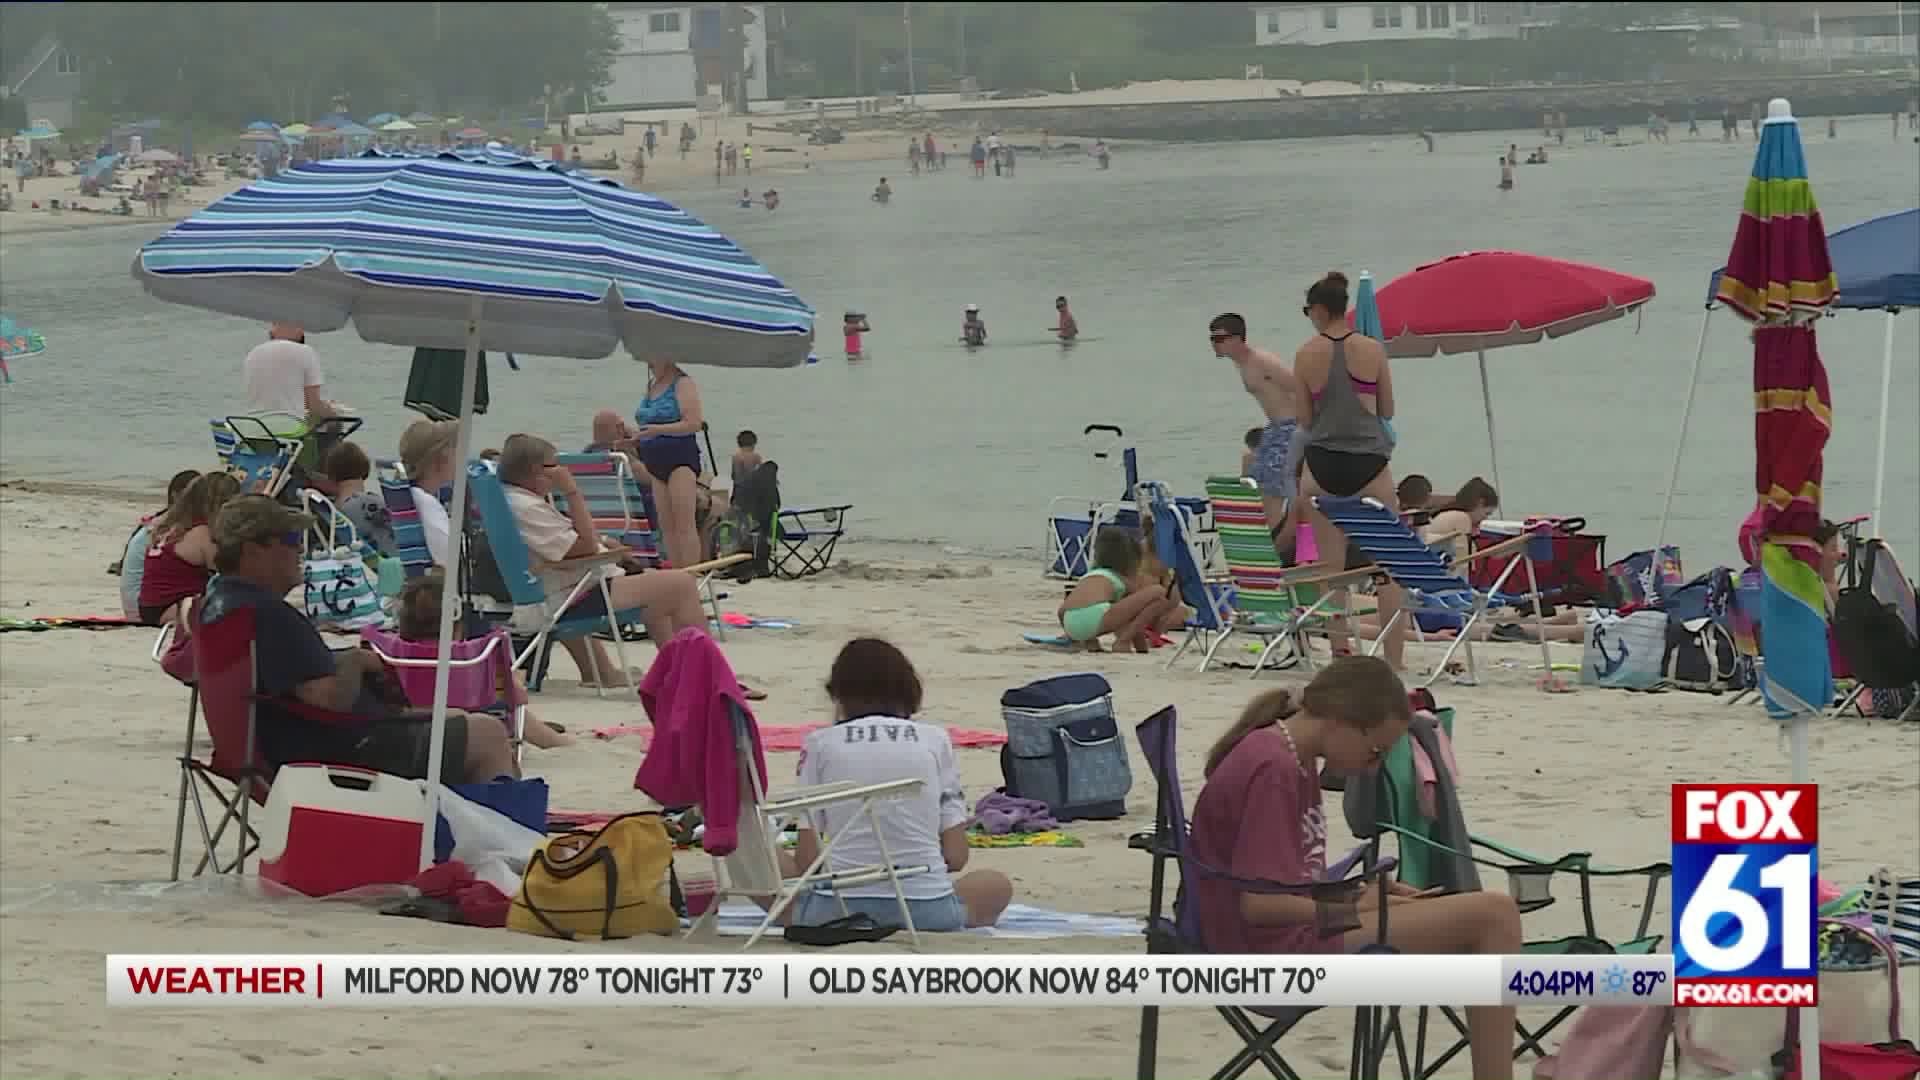 Day after 4th of July draws large crowds across beaches in CT